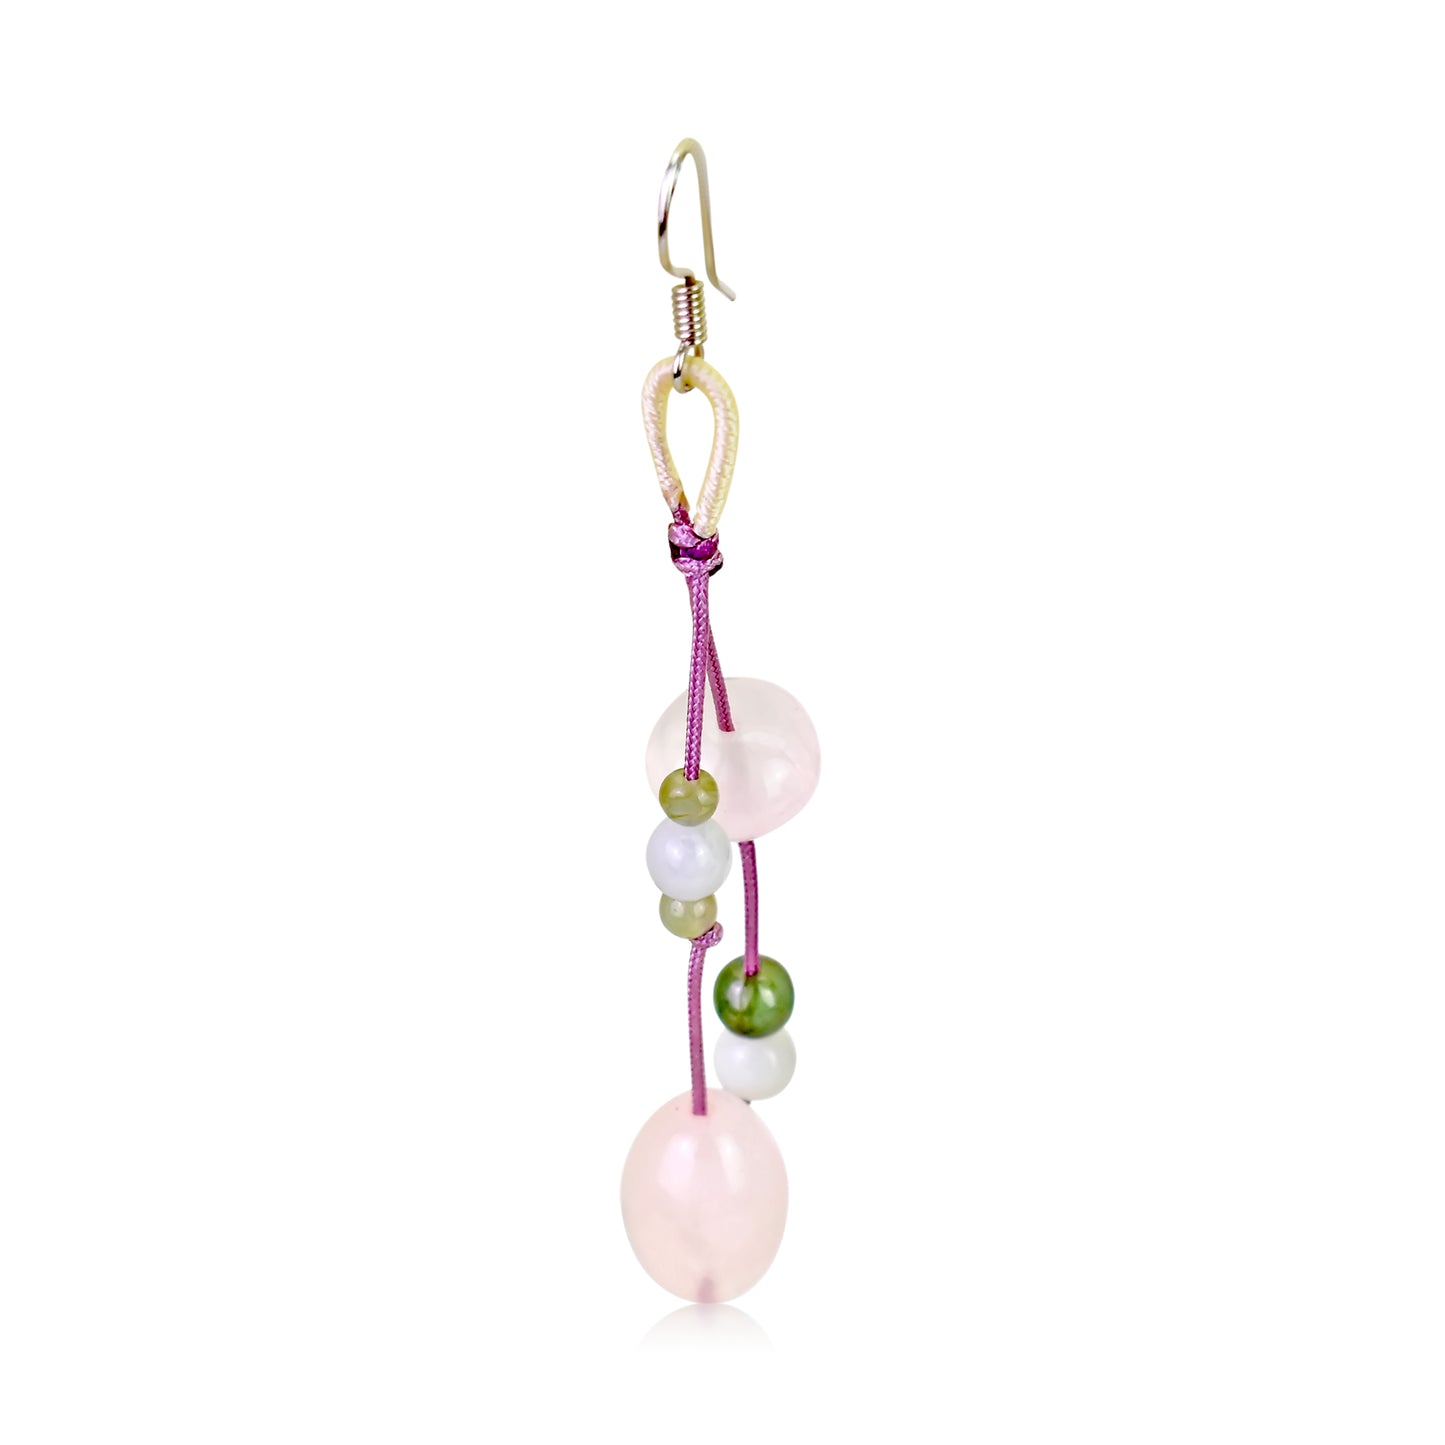 Put the Love into Your Look with Exquisite Rose Quartz Earrings made with Lavender Cord